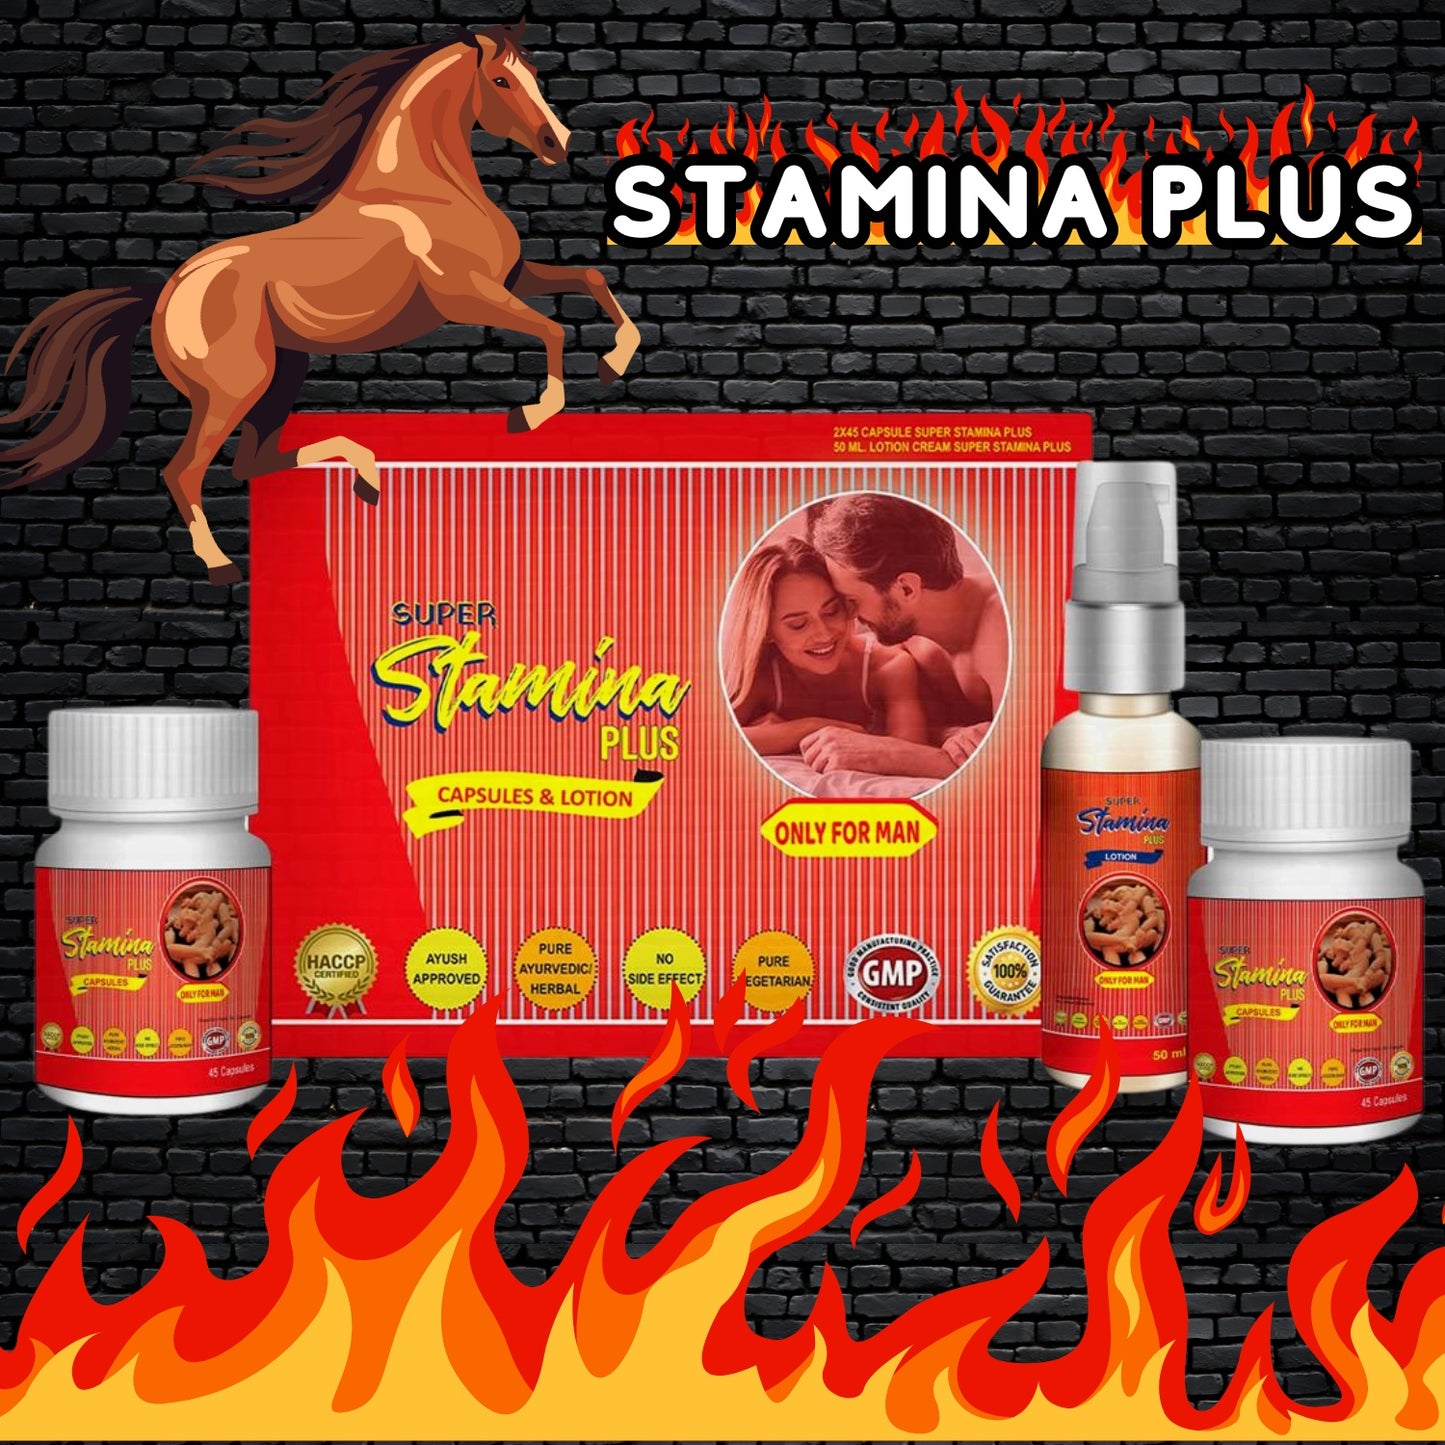 "Stamina Plus" || Ayurvedic Excellence for Sexual Wellness - Boost Your Vitality Naturally with This Premium Herbal Medicine!